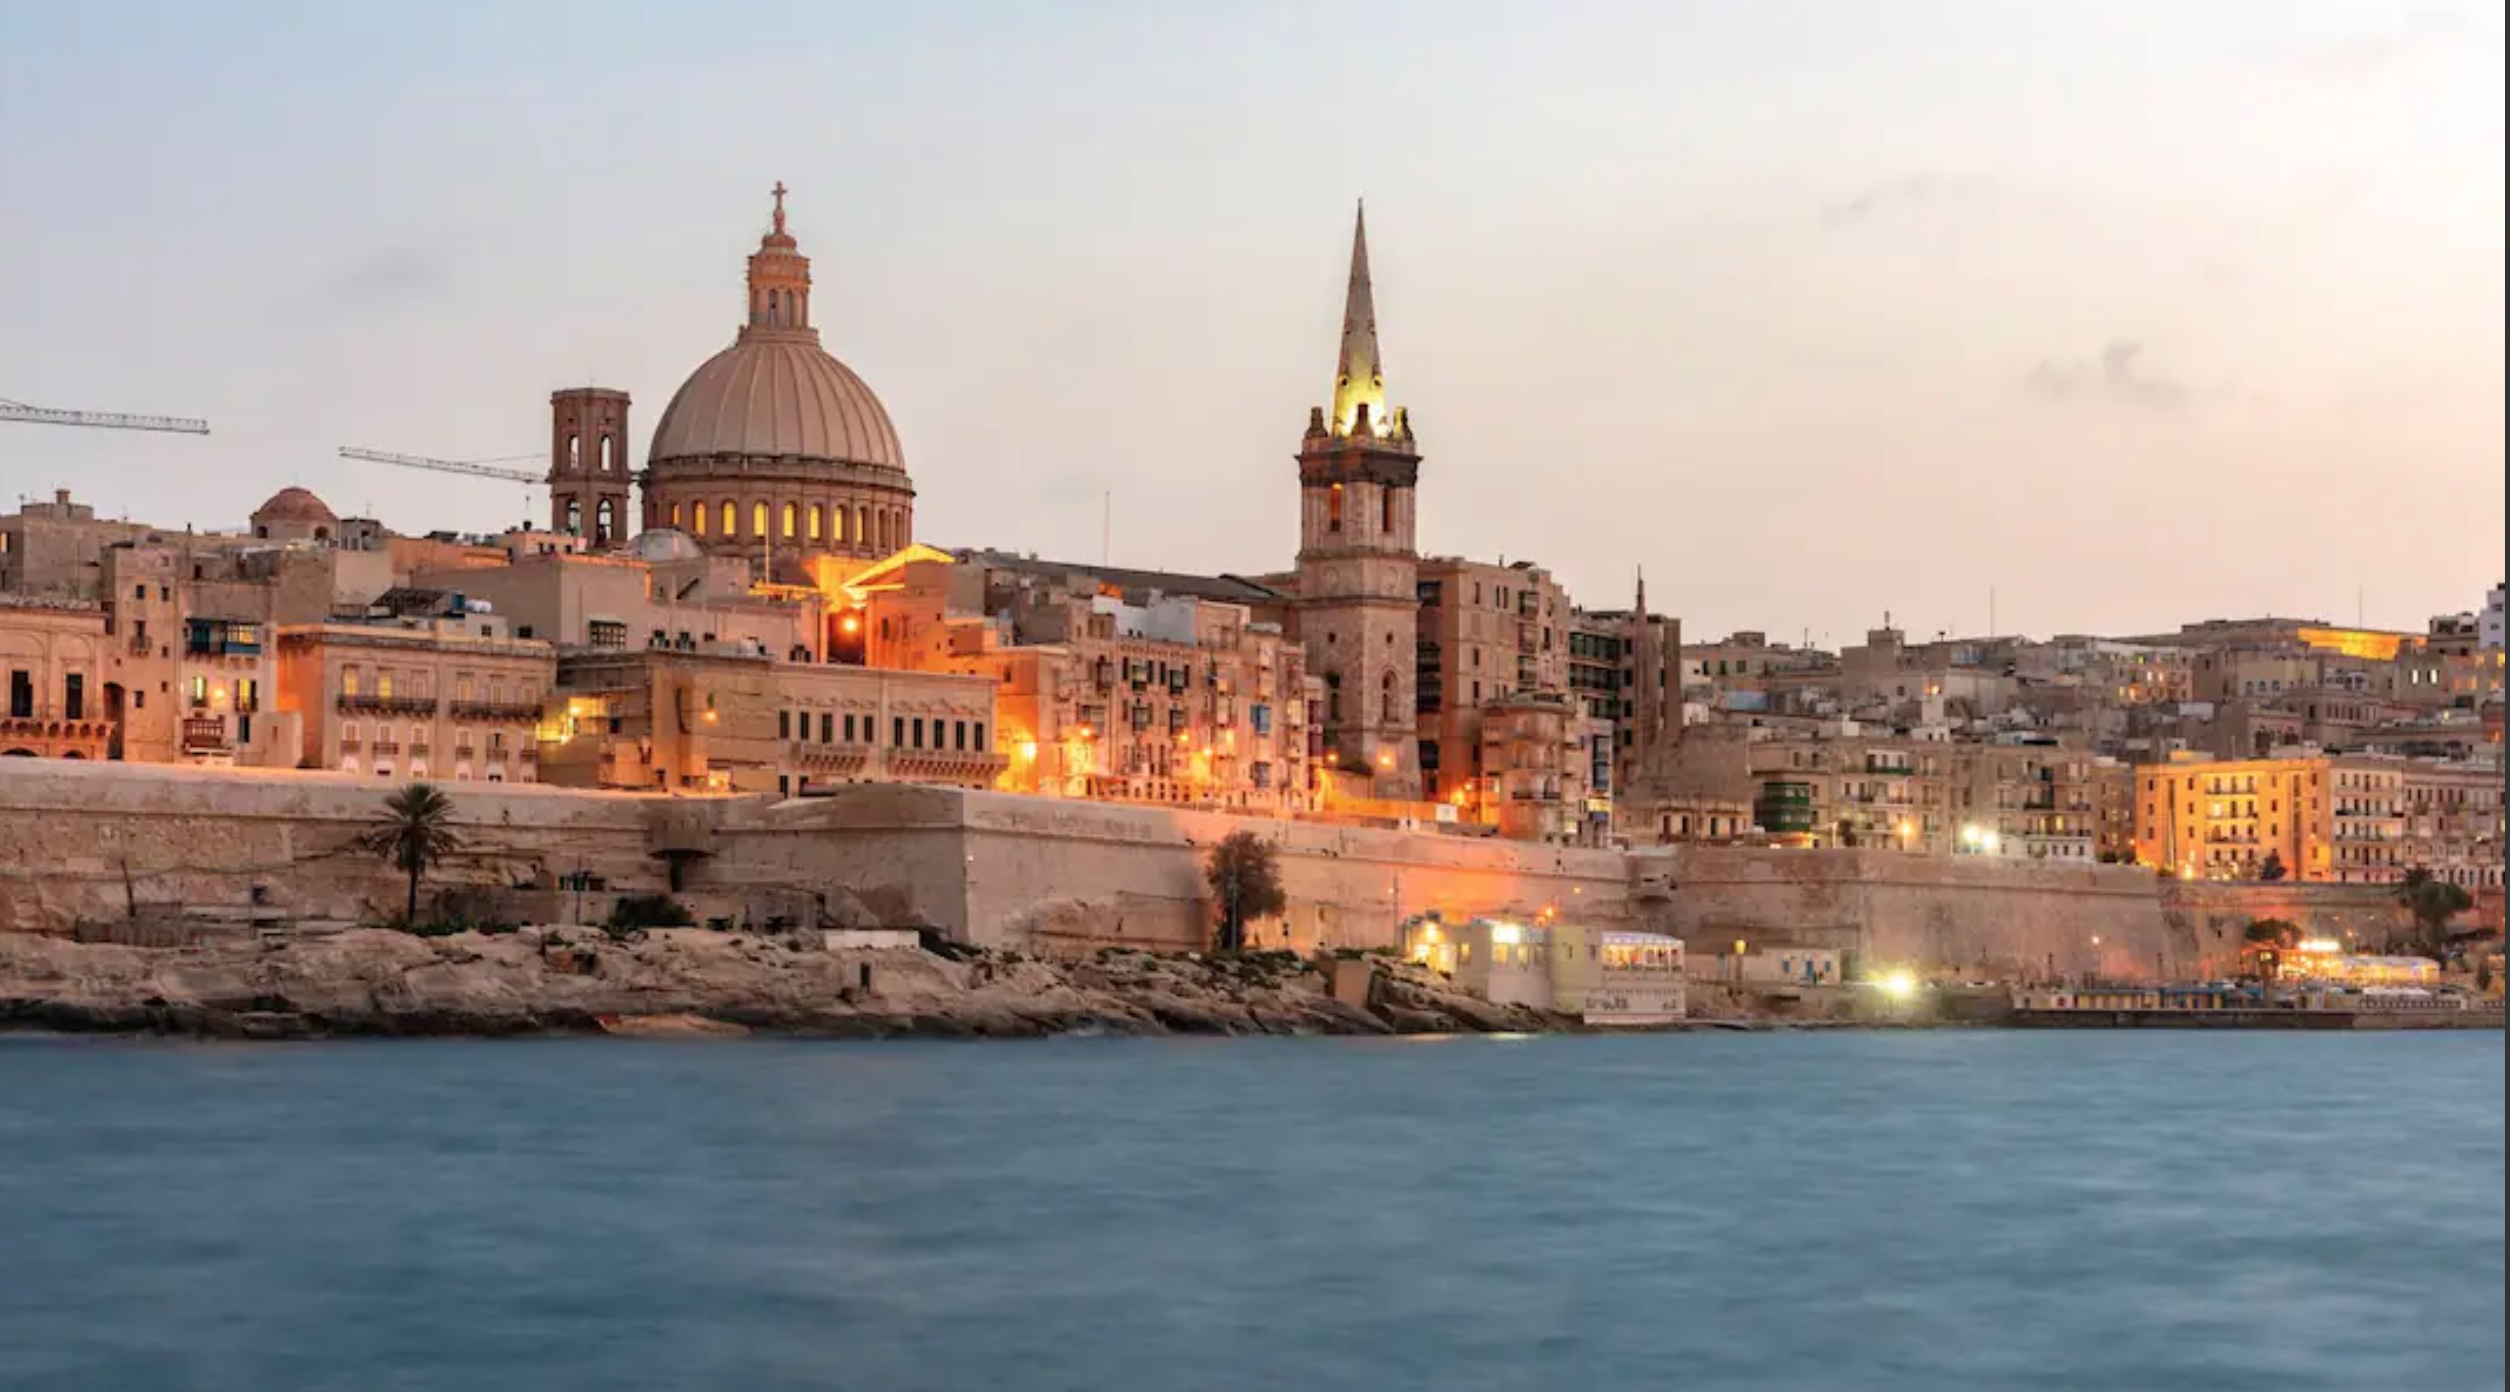 View of the city of Valletta from the sea